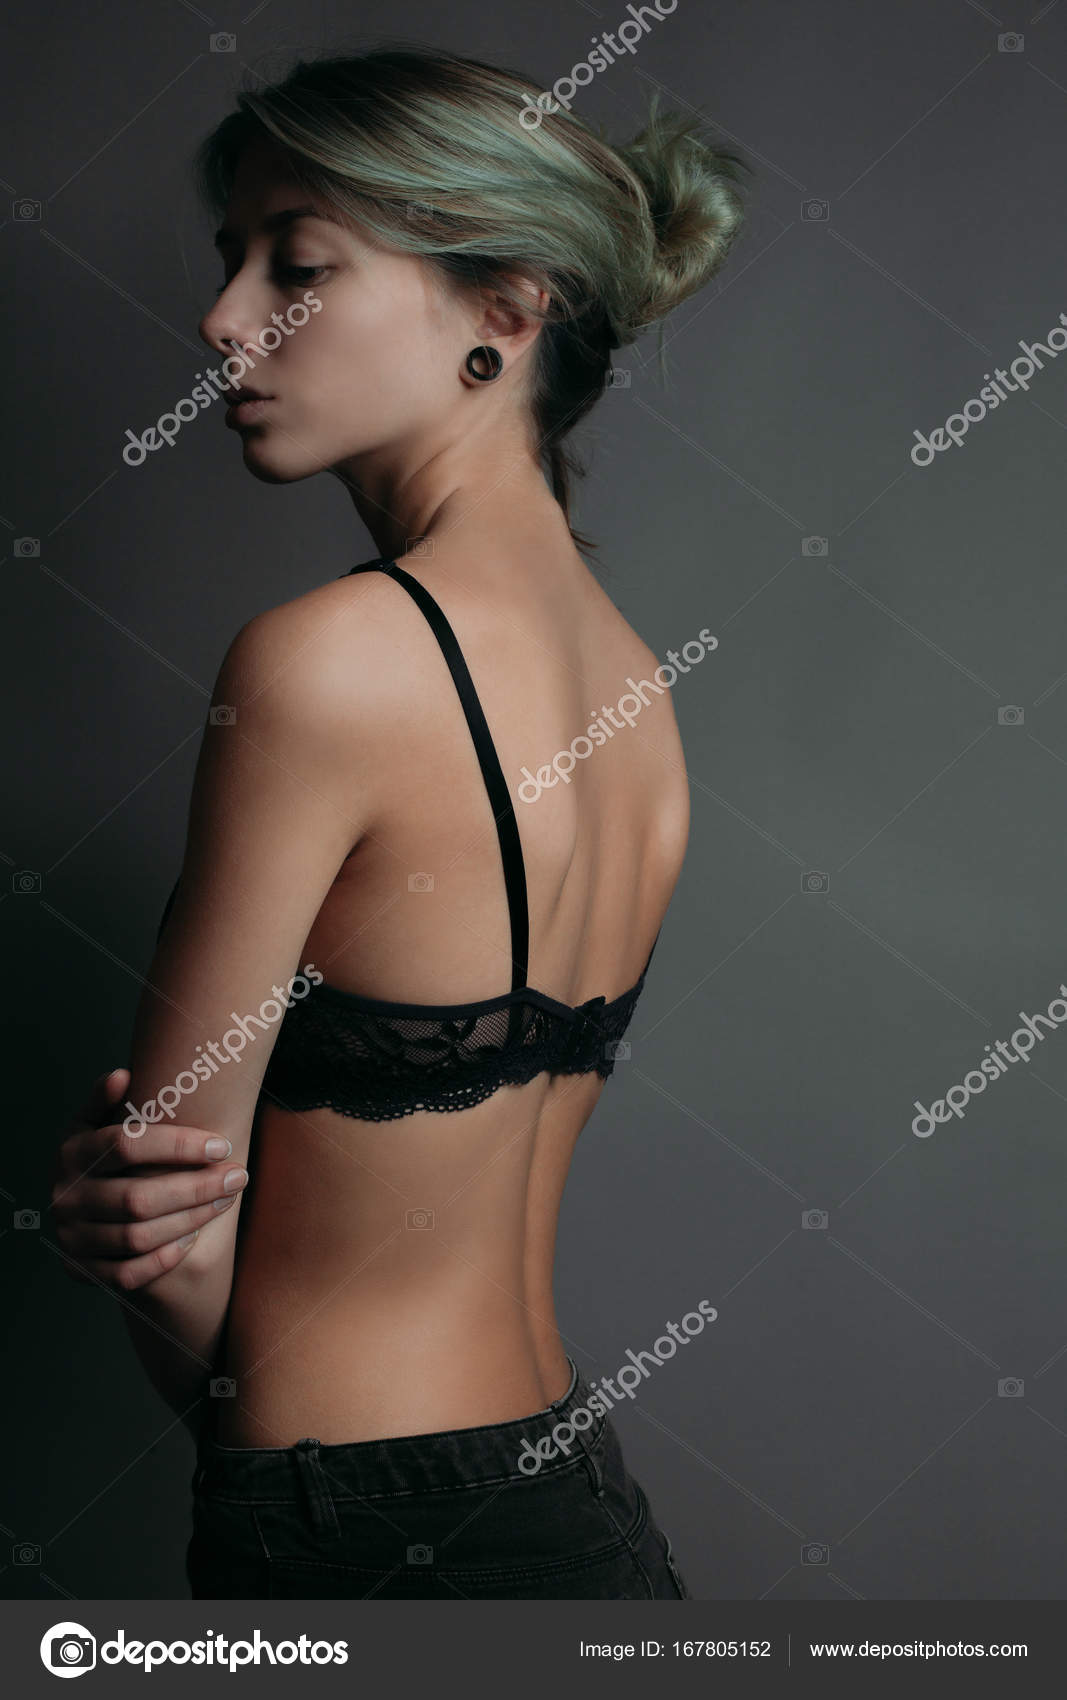 60+ Bra Girls Stock Videos and Royalty-Free Footage - iStock